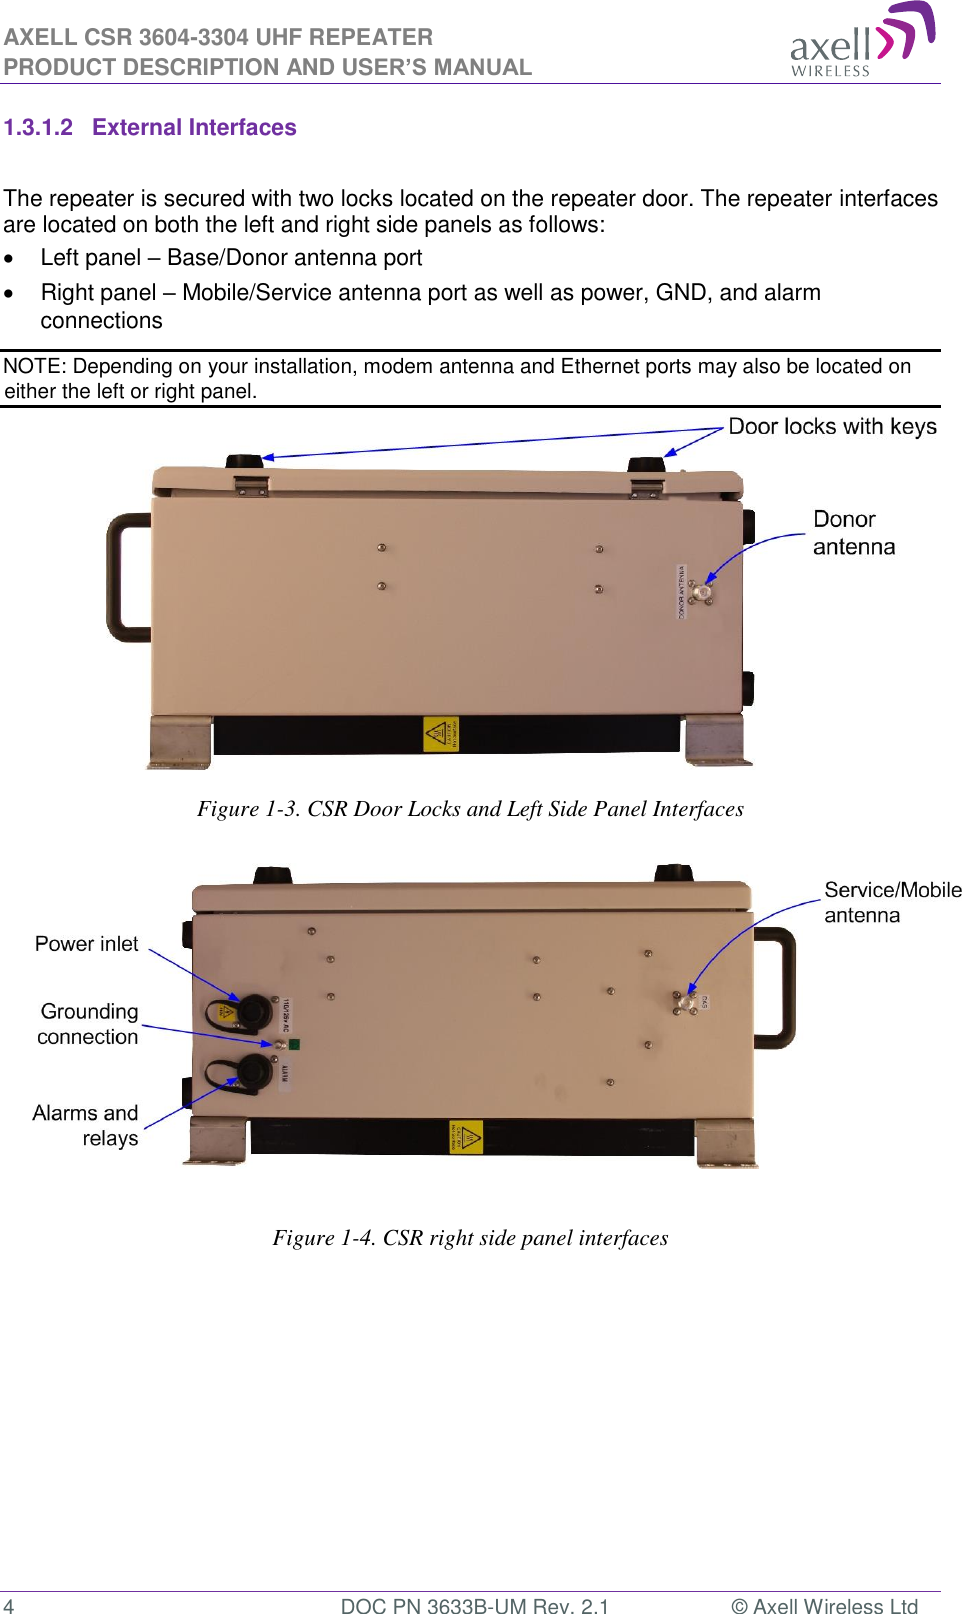 AXELL CSR 3604-3304 UHF REPEATER PRODUCT DESCRIPTION AND USER’S MANUAL  4  DOC PN 3633B-UM Rev. 2.1  © Axell Wireless Ltd  1.3.1.2  External Interfaces  The repeater is secured with two locks located on the repeater door. The repeater interfaces are located on both the left and right side panels as follows:   Left panel – Base/Donor antenna port   Right panel – Mobile/Service antenna port as well as power, GND, and alarm connections NOTE: Depending on your installation, modem antenna and Ethernet ports may also be located on either the left or right panel.               Figure 1-3. CSR Door Locks and Left Side Panel Interfaces                  Figure 1-4. CSR right side panel interfaces             